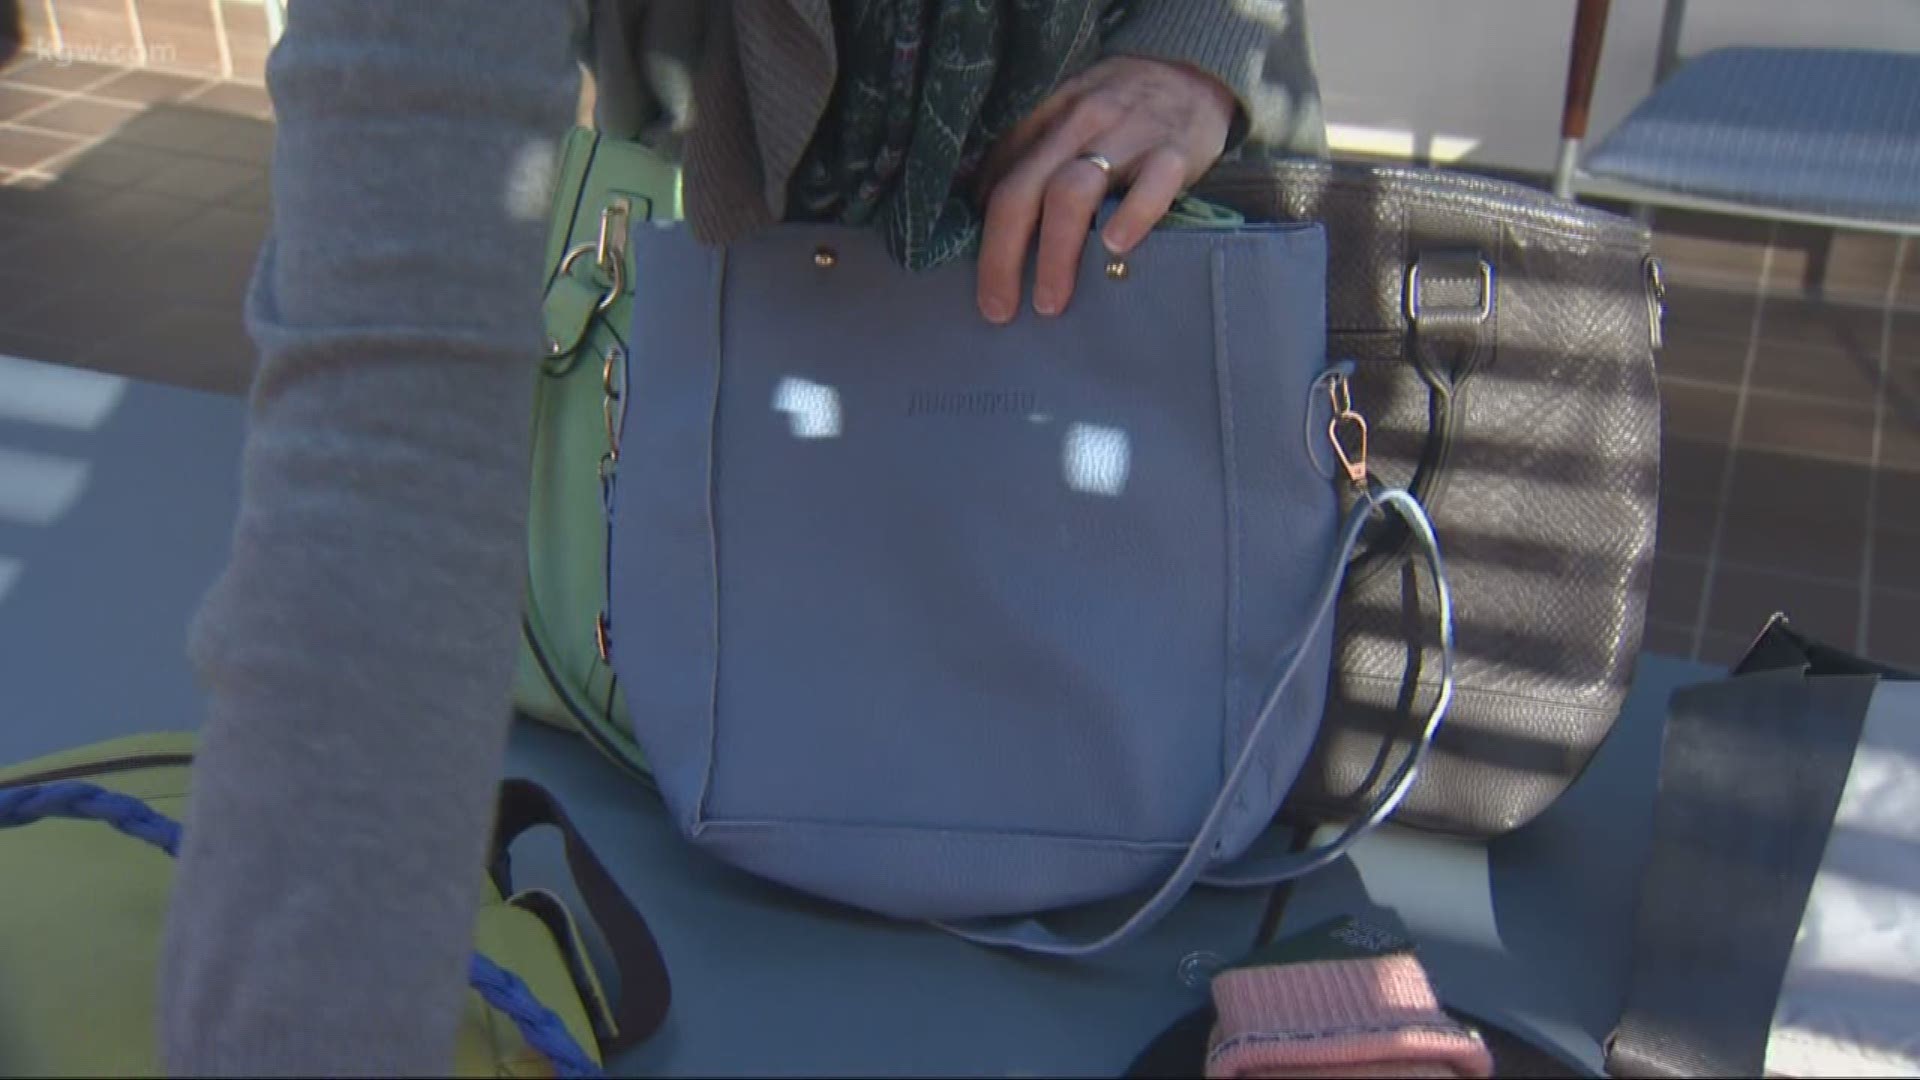 The good deeds of some Portland women will put purses in the hands of other women who have learned to go without the luxury.